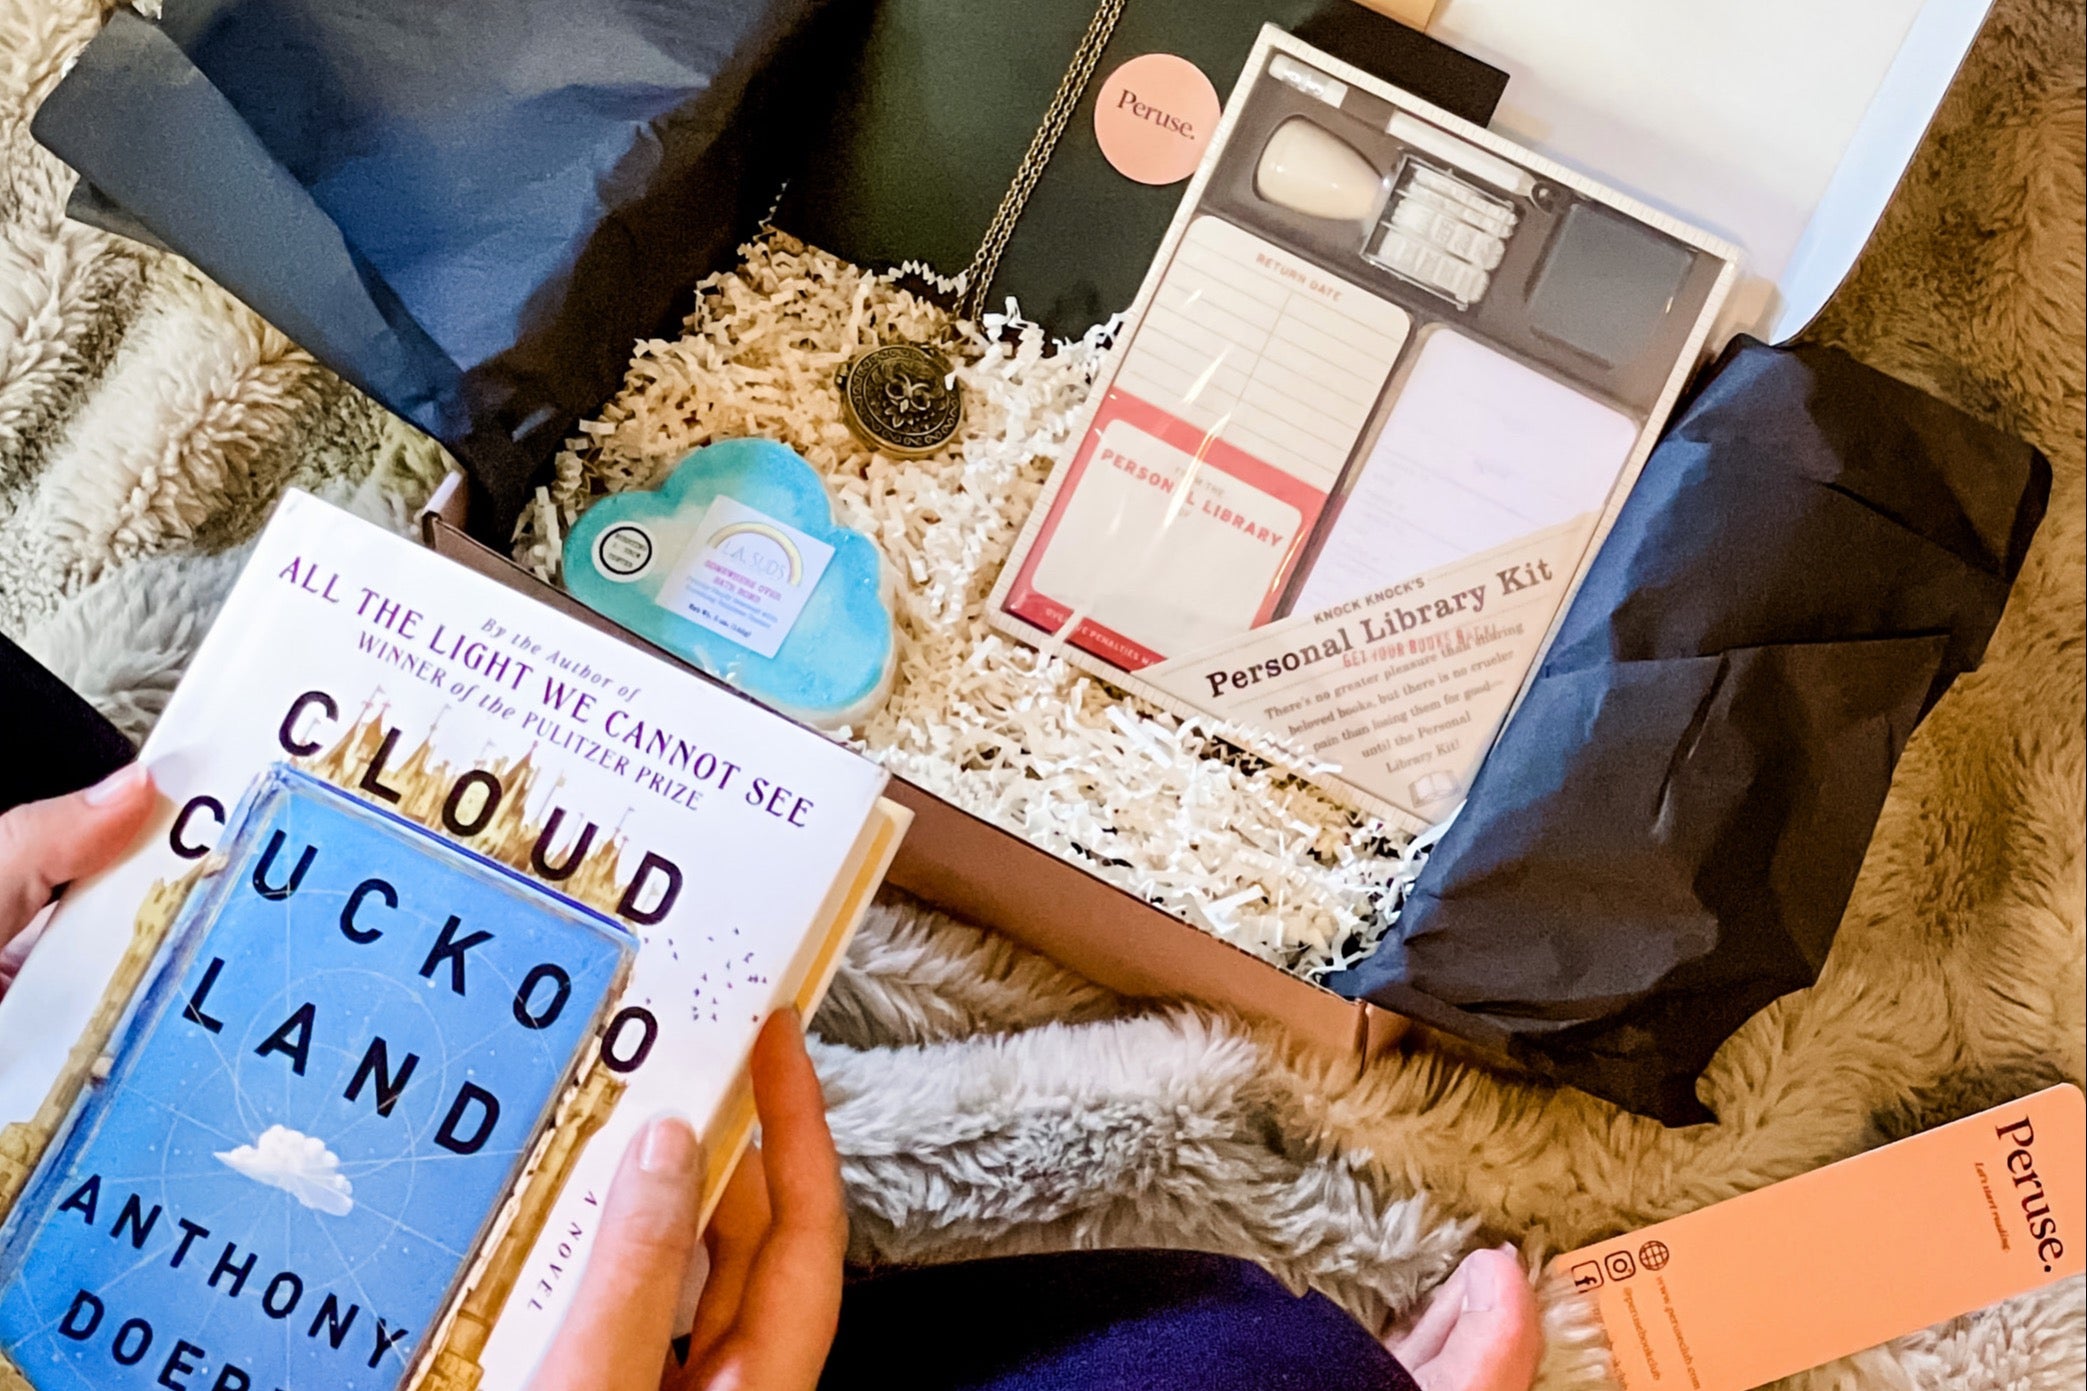 Knock Knock's Personal Library Kit Is The Best Gift For Your Book-Loving  Friends